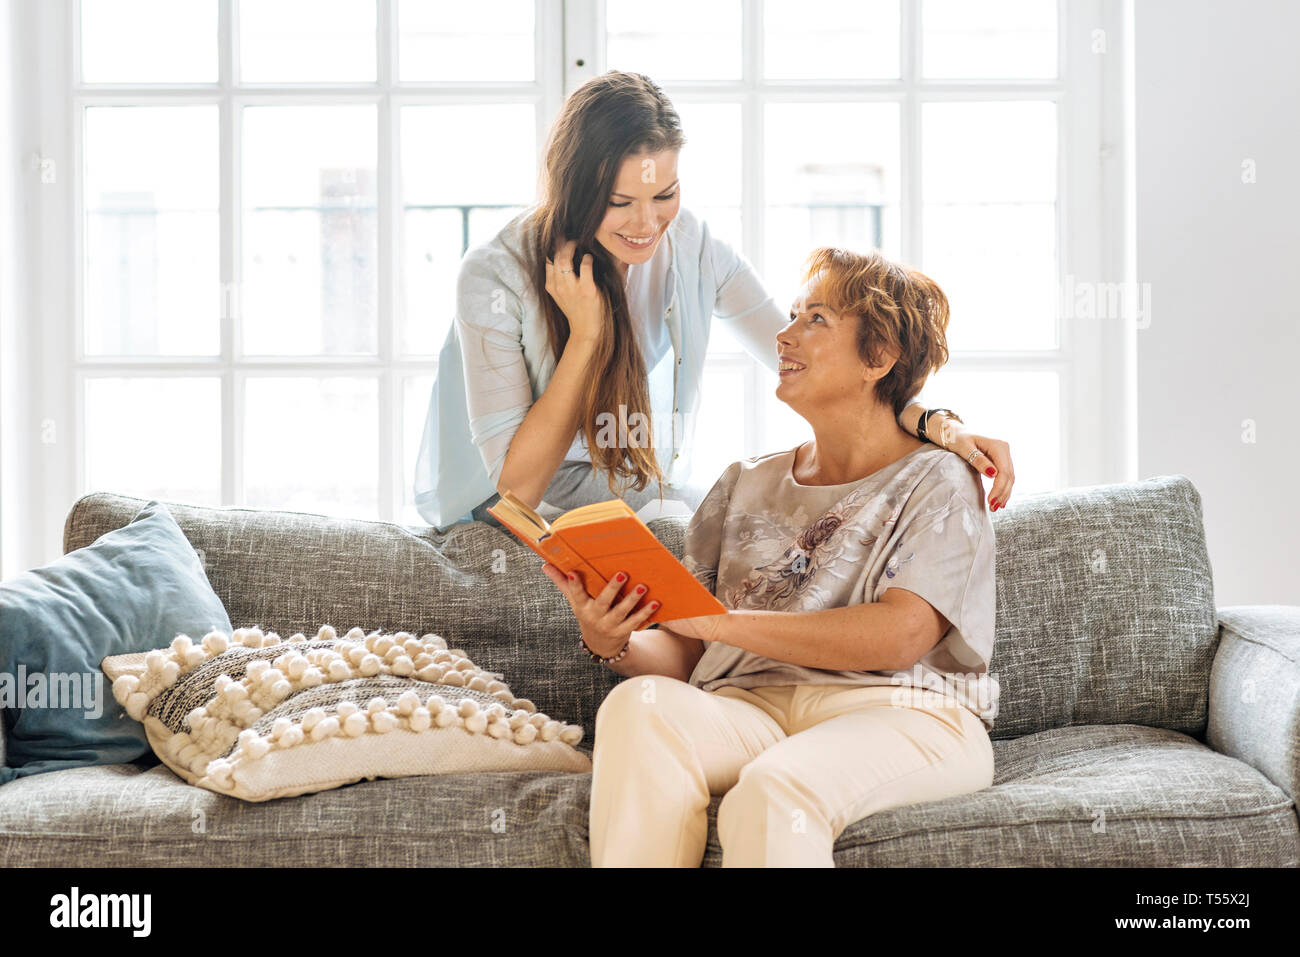 Mother and adult daughter looking at book on sofa Stock Photo